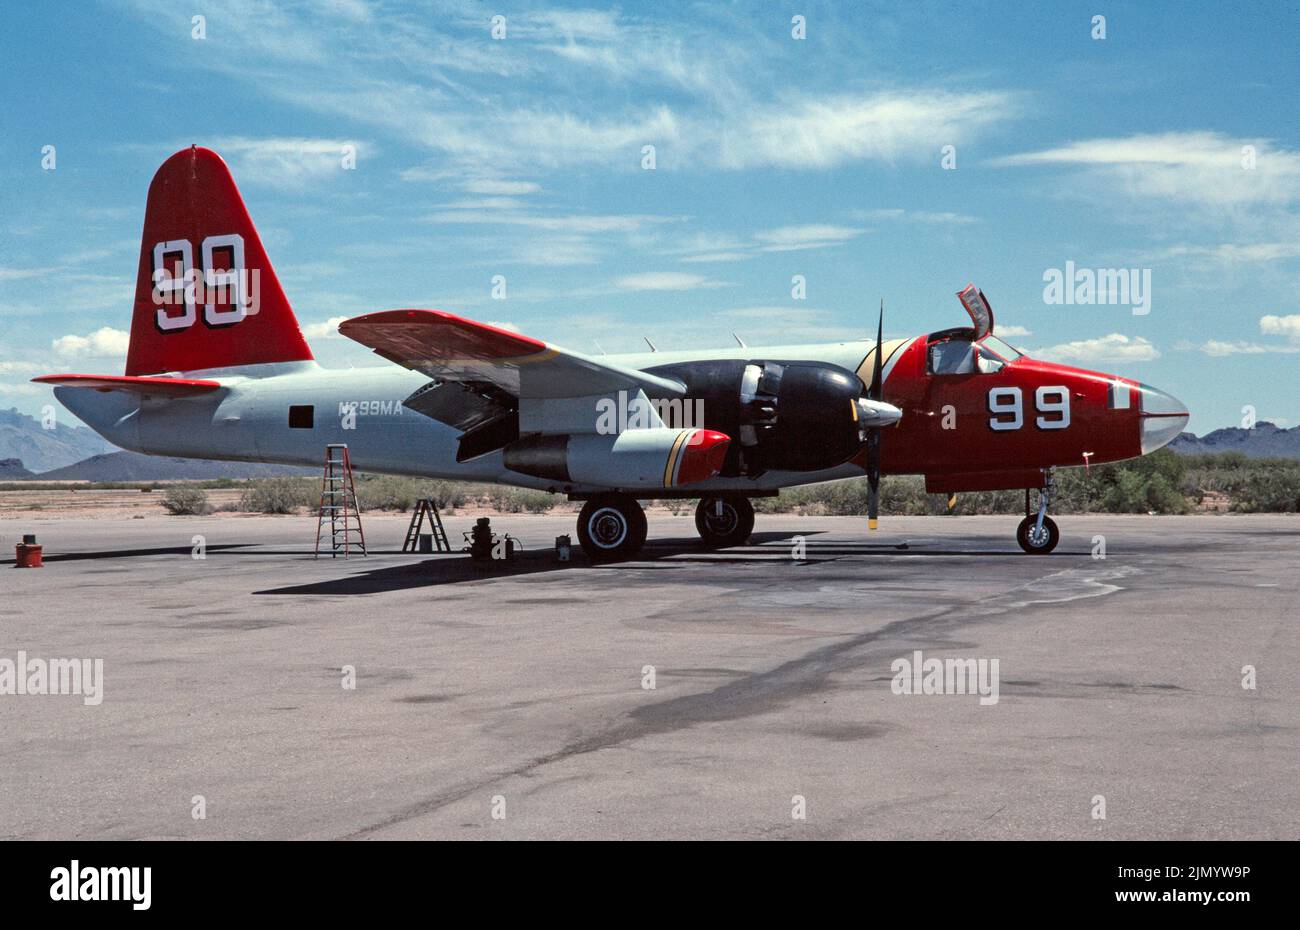 A Lockheed P-2 Neptune Aircraft, N299MA, used as a water Tanker for aerial fire fighting, at Marana Airport in Arizona, USA, in September 1993. Destroyed in a fatal crash in 2003. Stock Photo